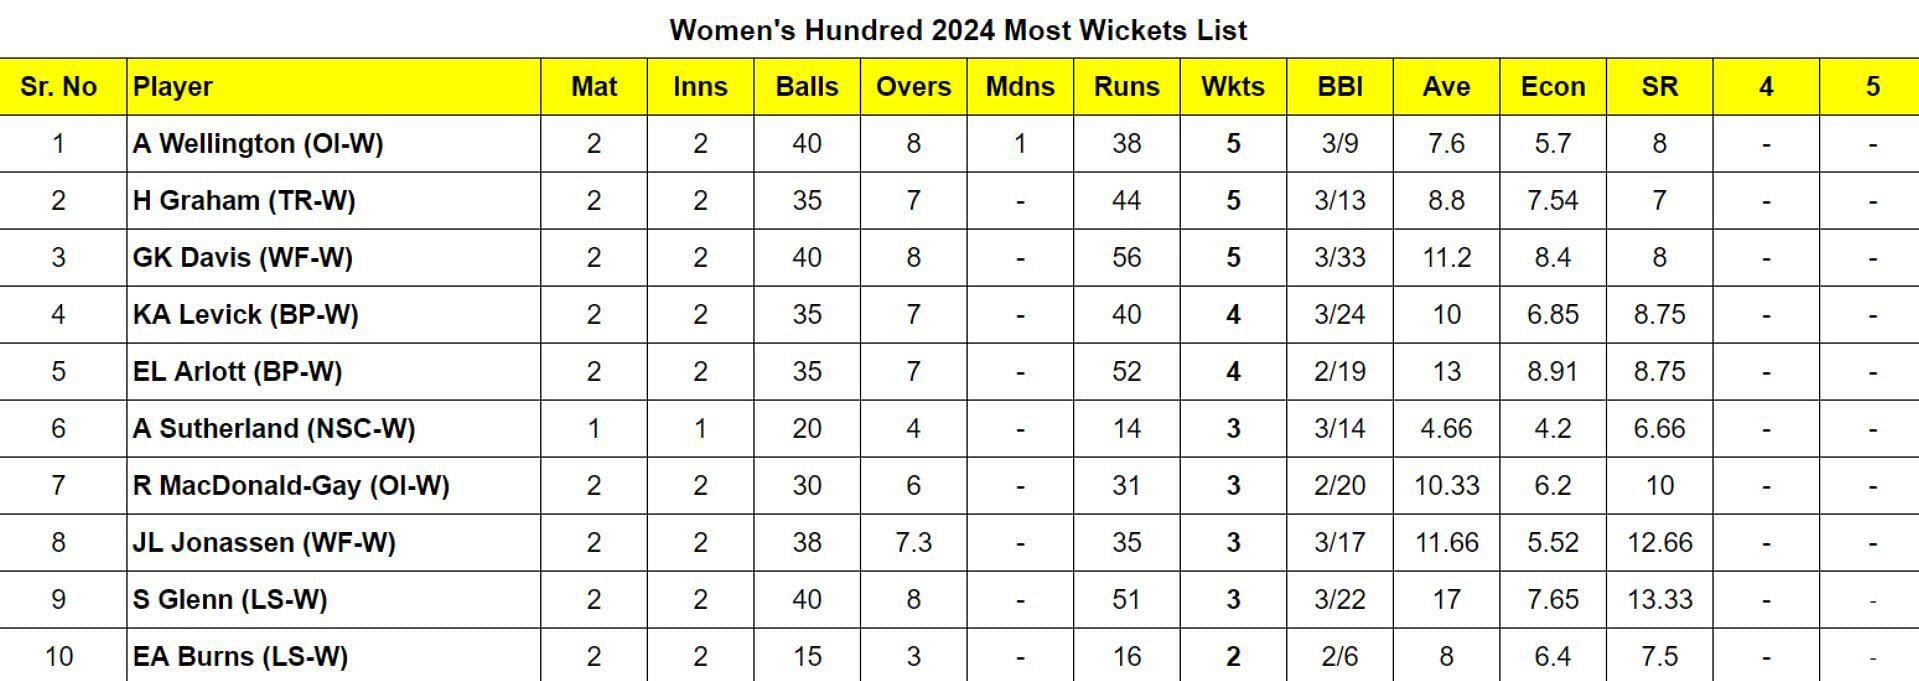 The Hundred Women's 2024 Most Runs and Most Wickets after Manchester Originals vs Trent Rockets (Updated) ft. Nat Sciver-Brunt & Heather Graham